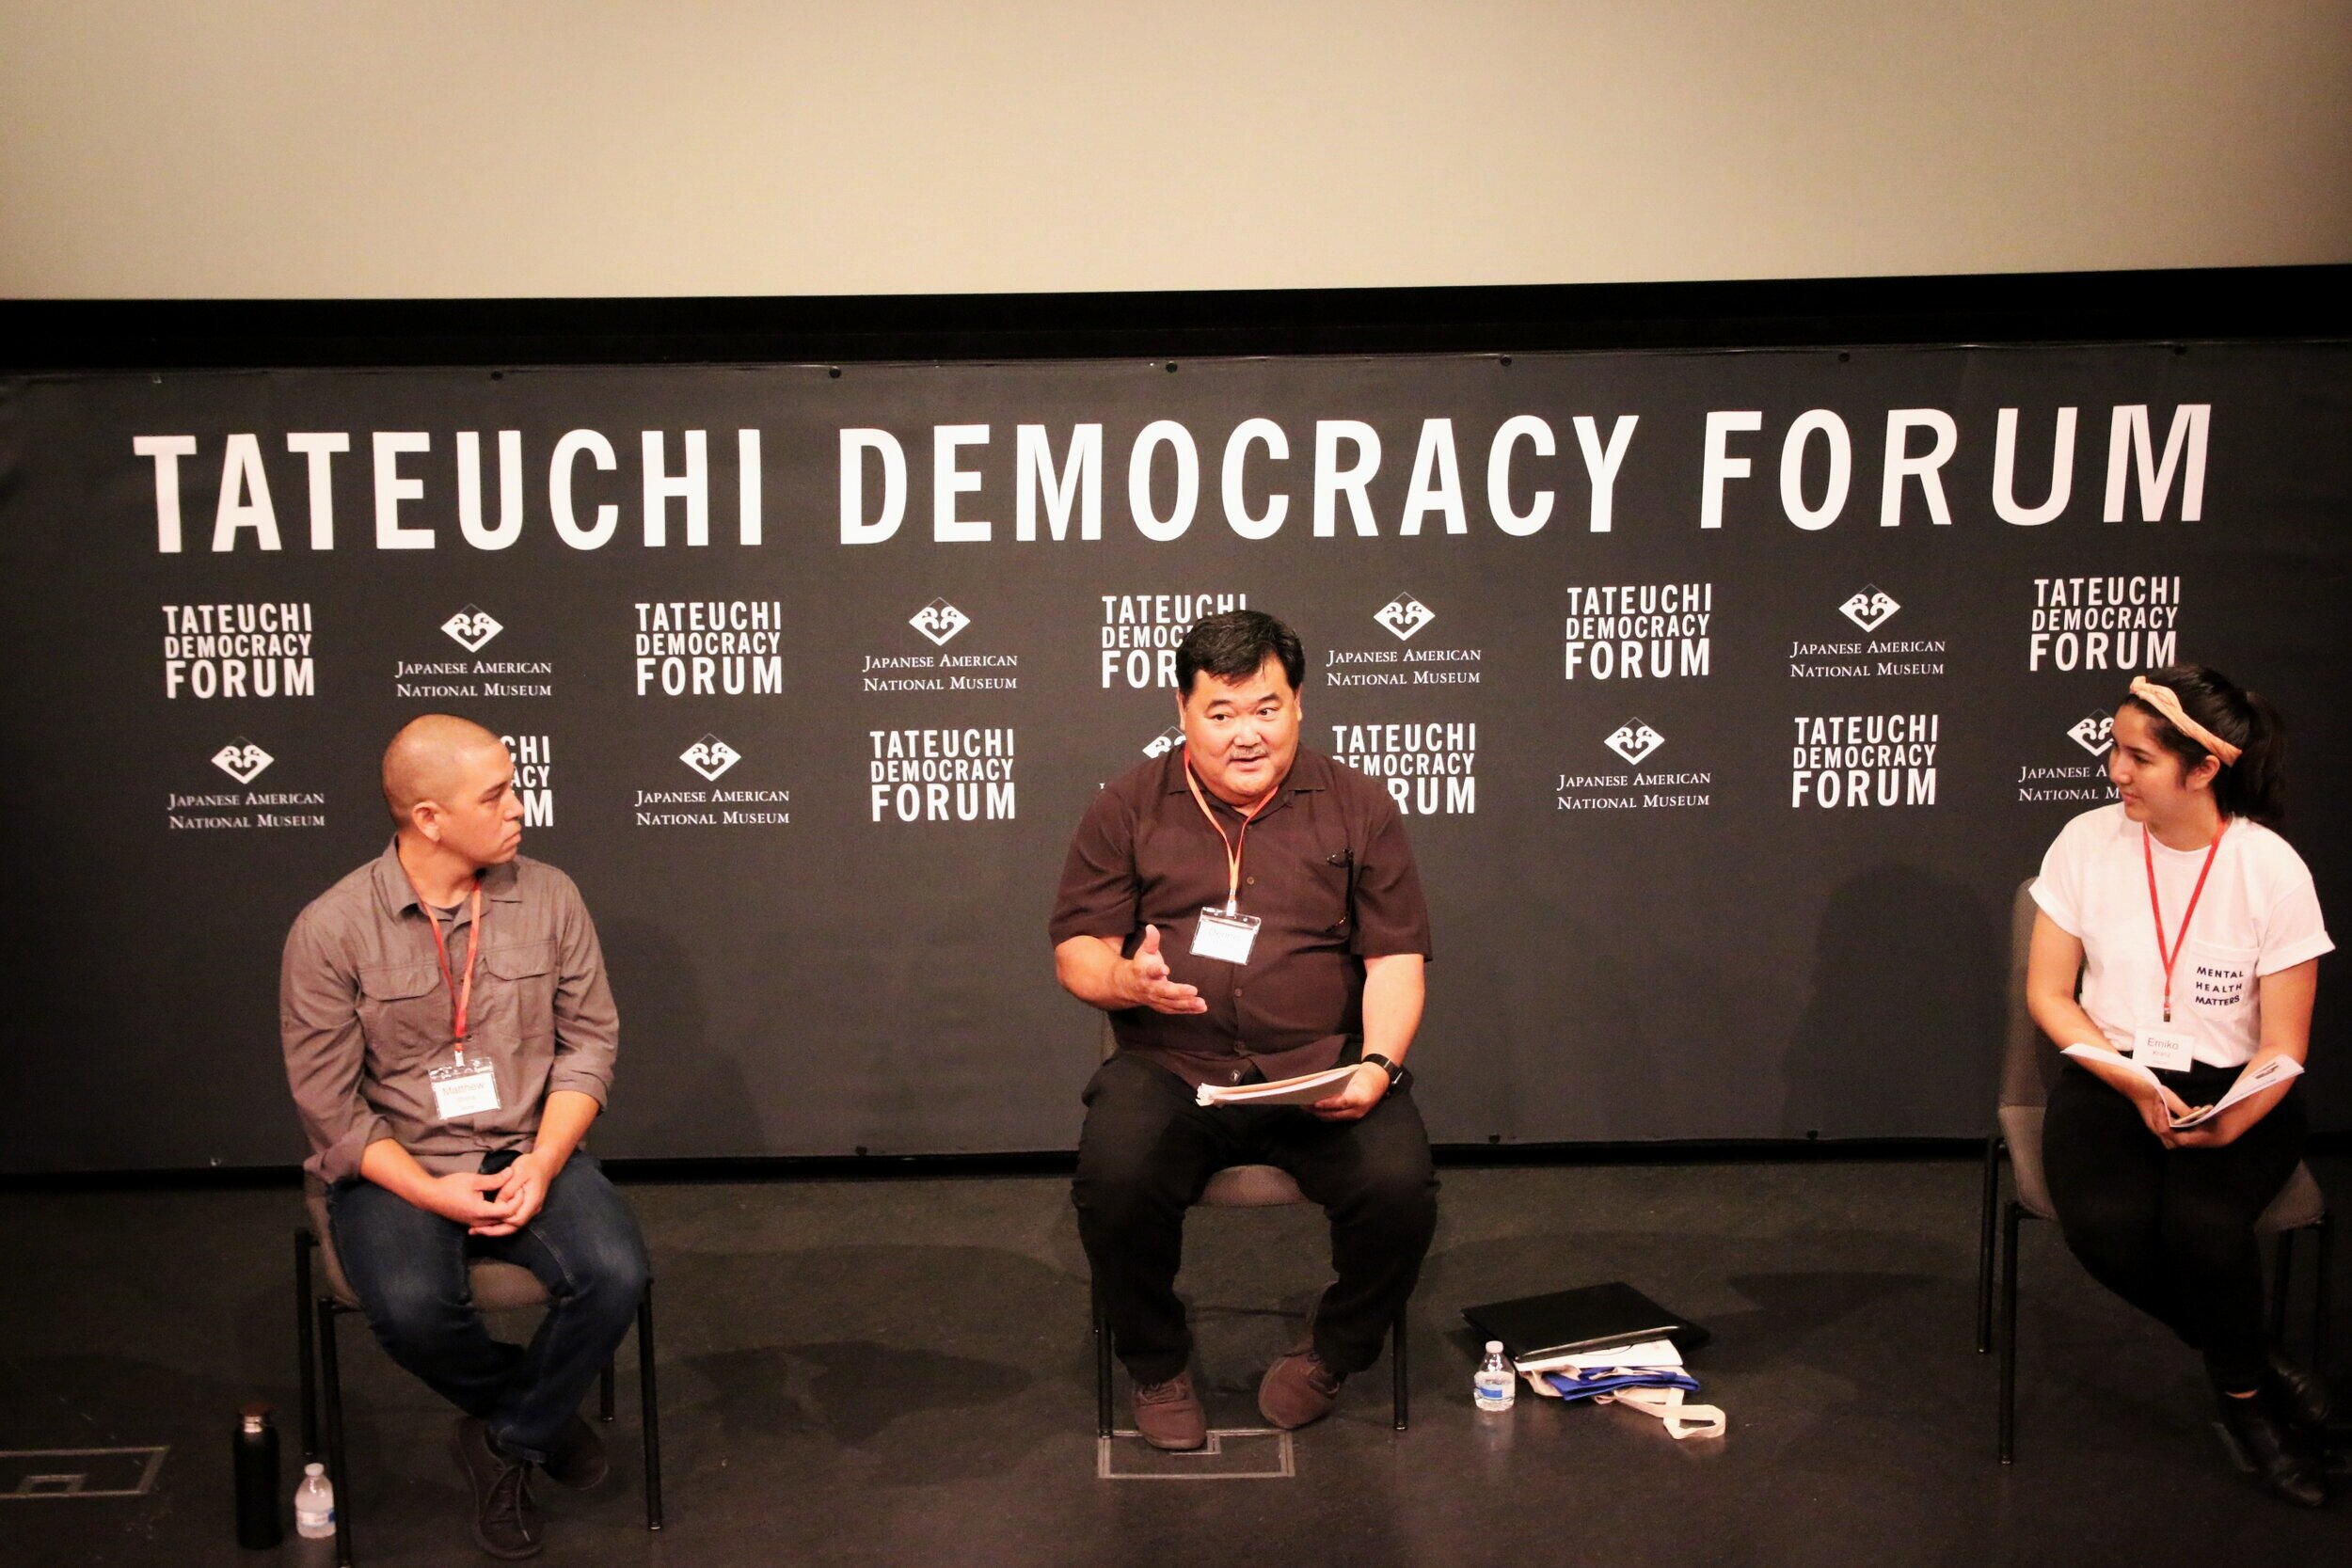 A man speaks in front of a sign that says “Japanese American National Museum” and “Tateuchi Democracy Forum.”  